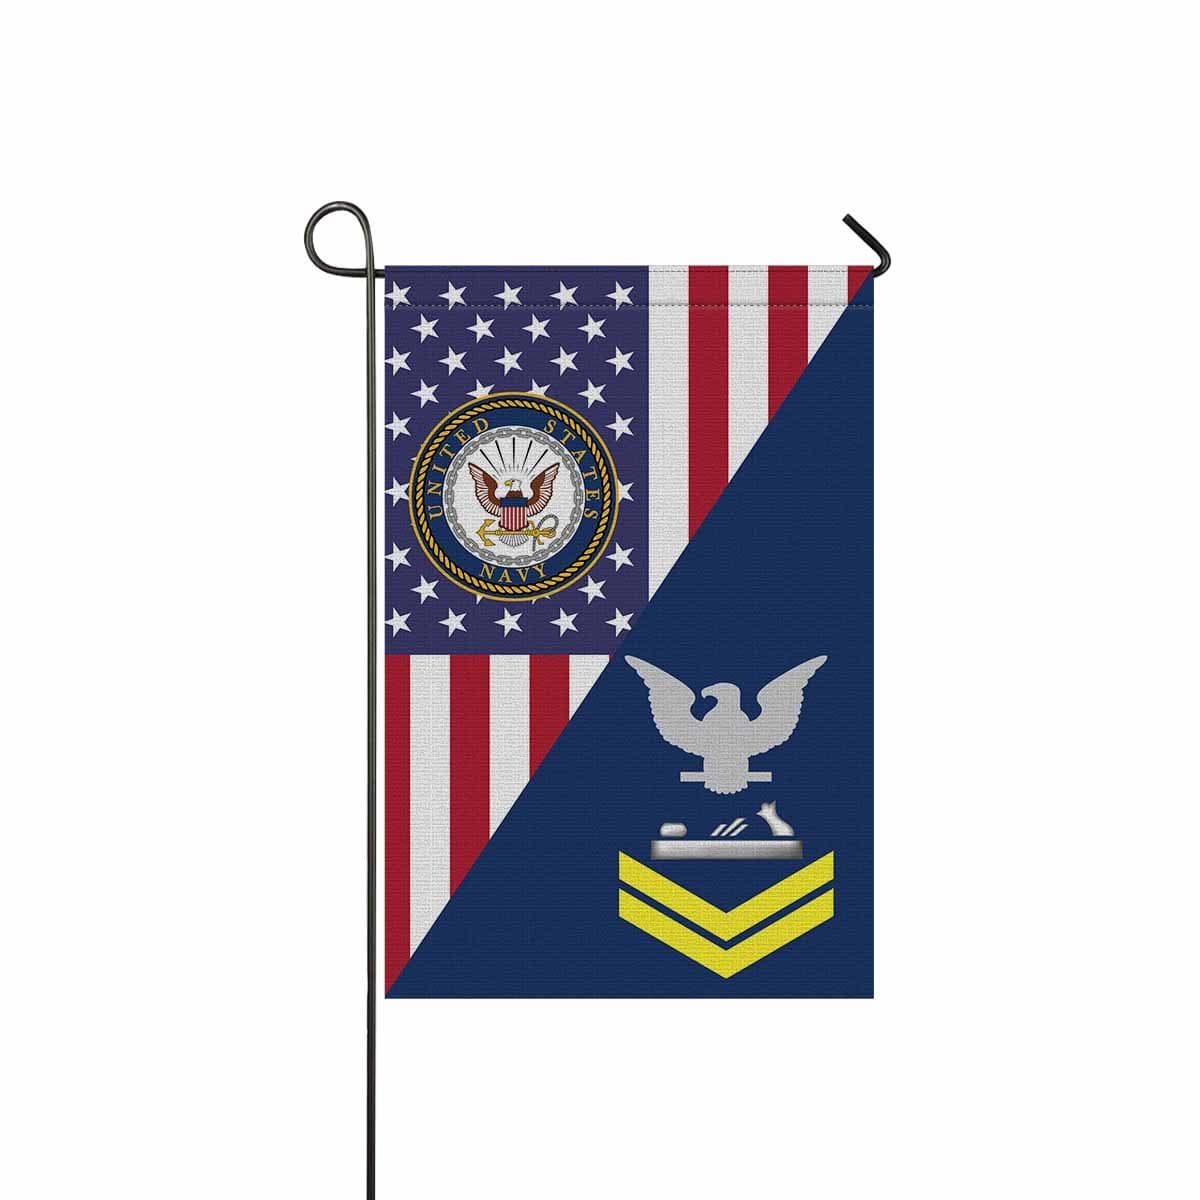 Navy Patternmaker Navy PM E-5 Gold Stripe Garden Flag/Yard Flag 12 inches x 18 inches Twin-Side Printing-GDFlag-Navy-Rating-Veterans Nation